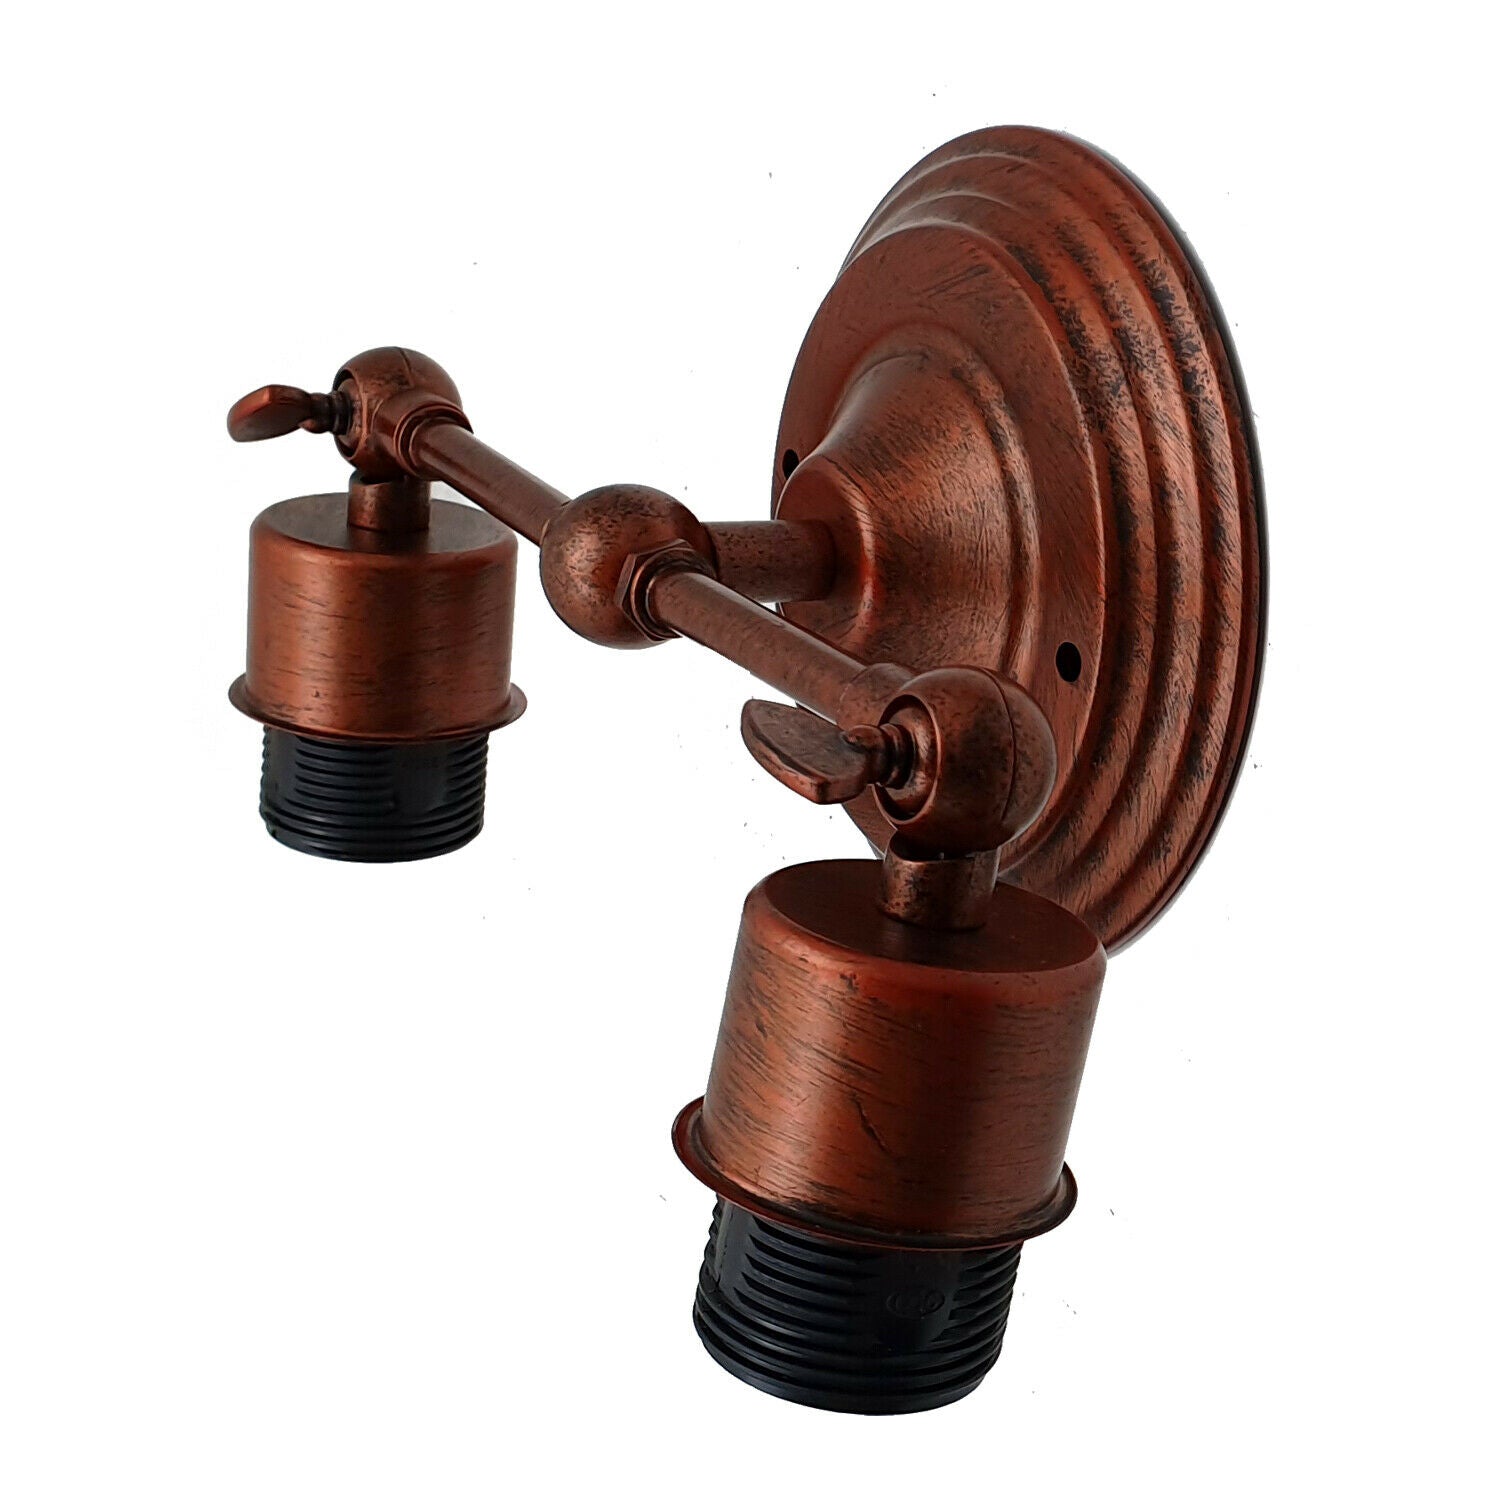 Modern Retro Brushed Copper Vintage Industrial Wall Mounted Lights Rustic Wall Sconce Lamps Fixture~2280 - LEDSone UK Ltd